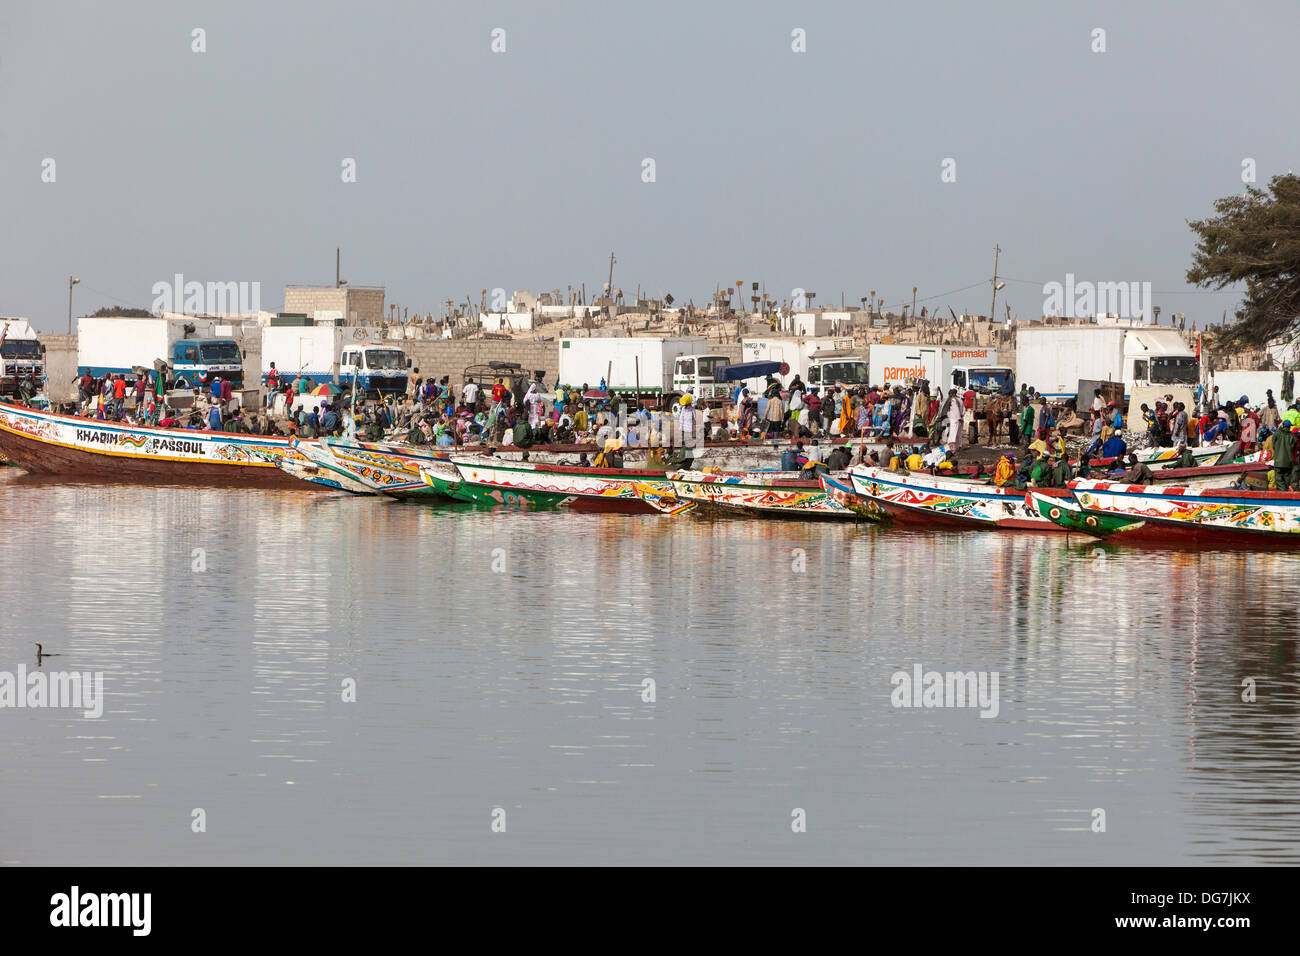 Senegal, Saint Louis. Refrigerated Trucks Lined up to Buy and Carry Fishermen's Catch to Inland Markets. Stock Photo